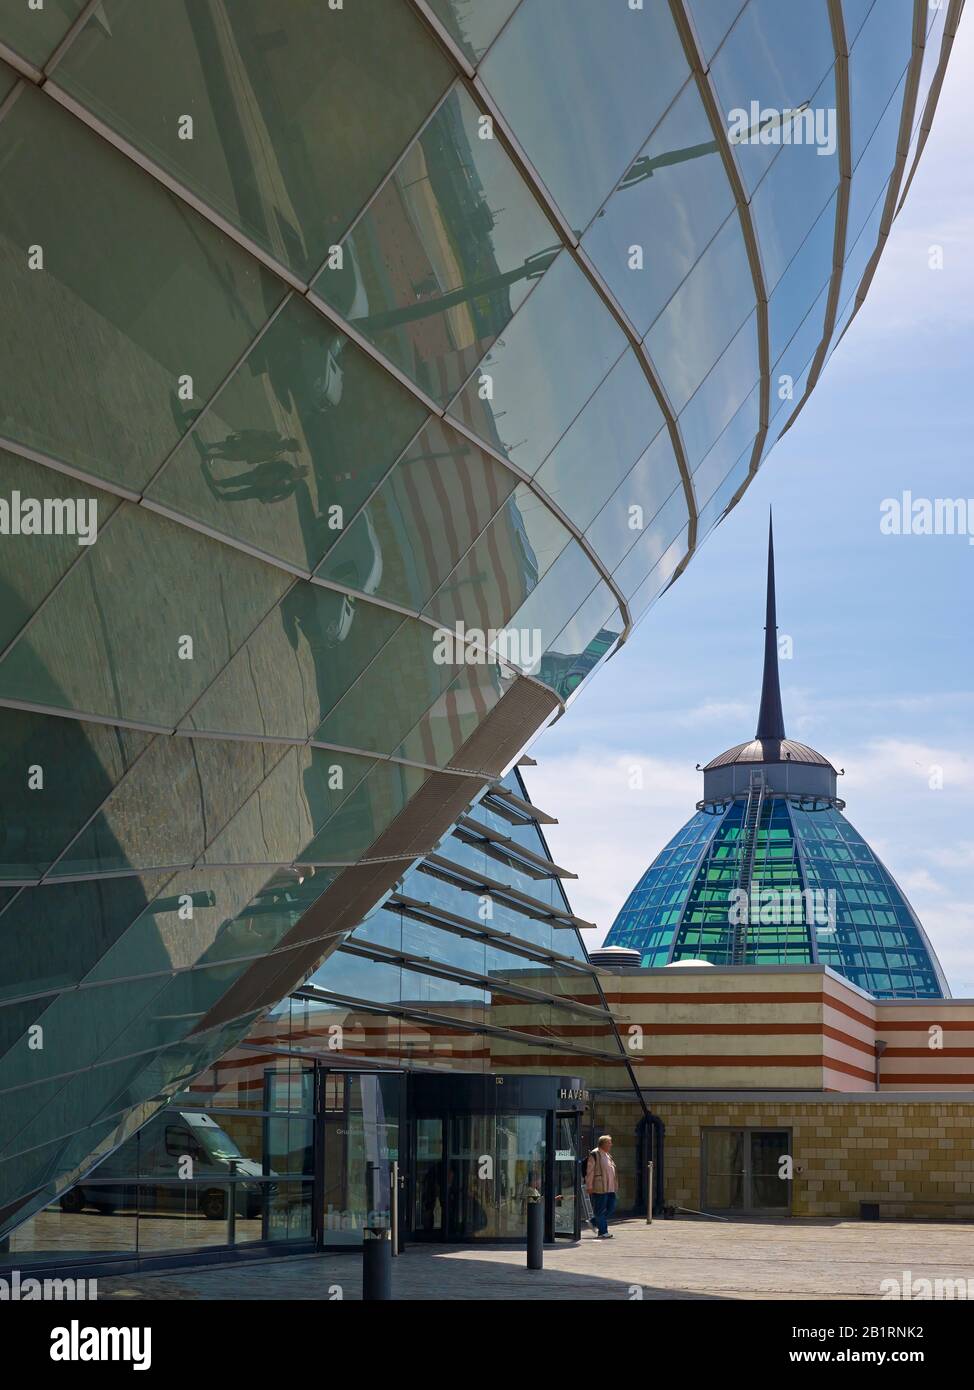 Outer shell of the Klimahaus and dome of the Mediterraneo, Bremerhaven, Bremen, Germany, Stock Photo